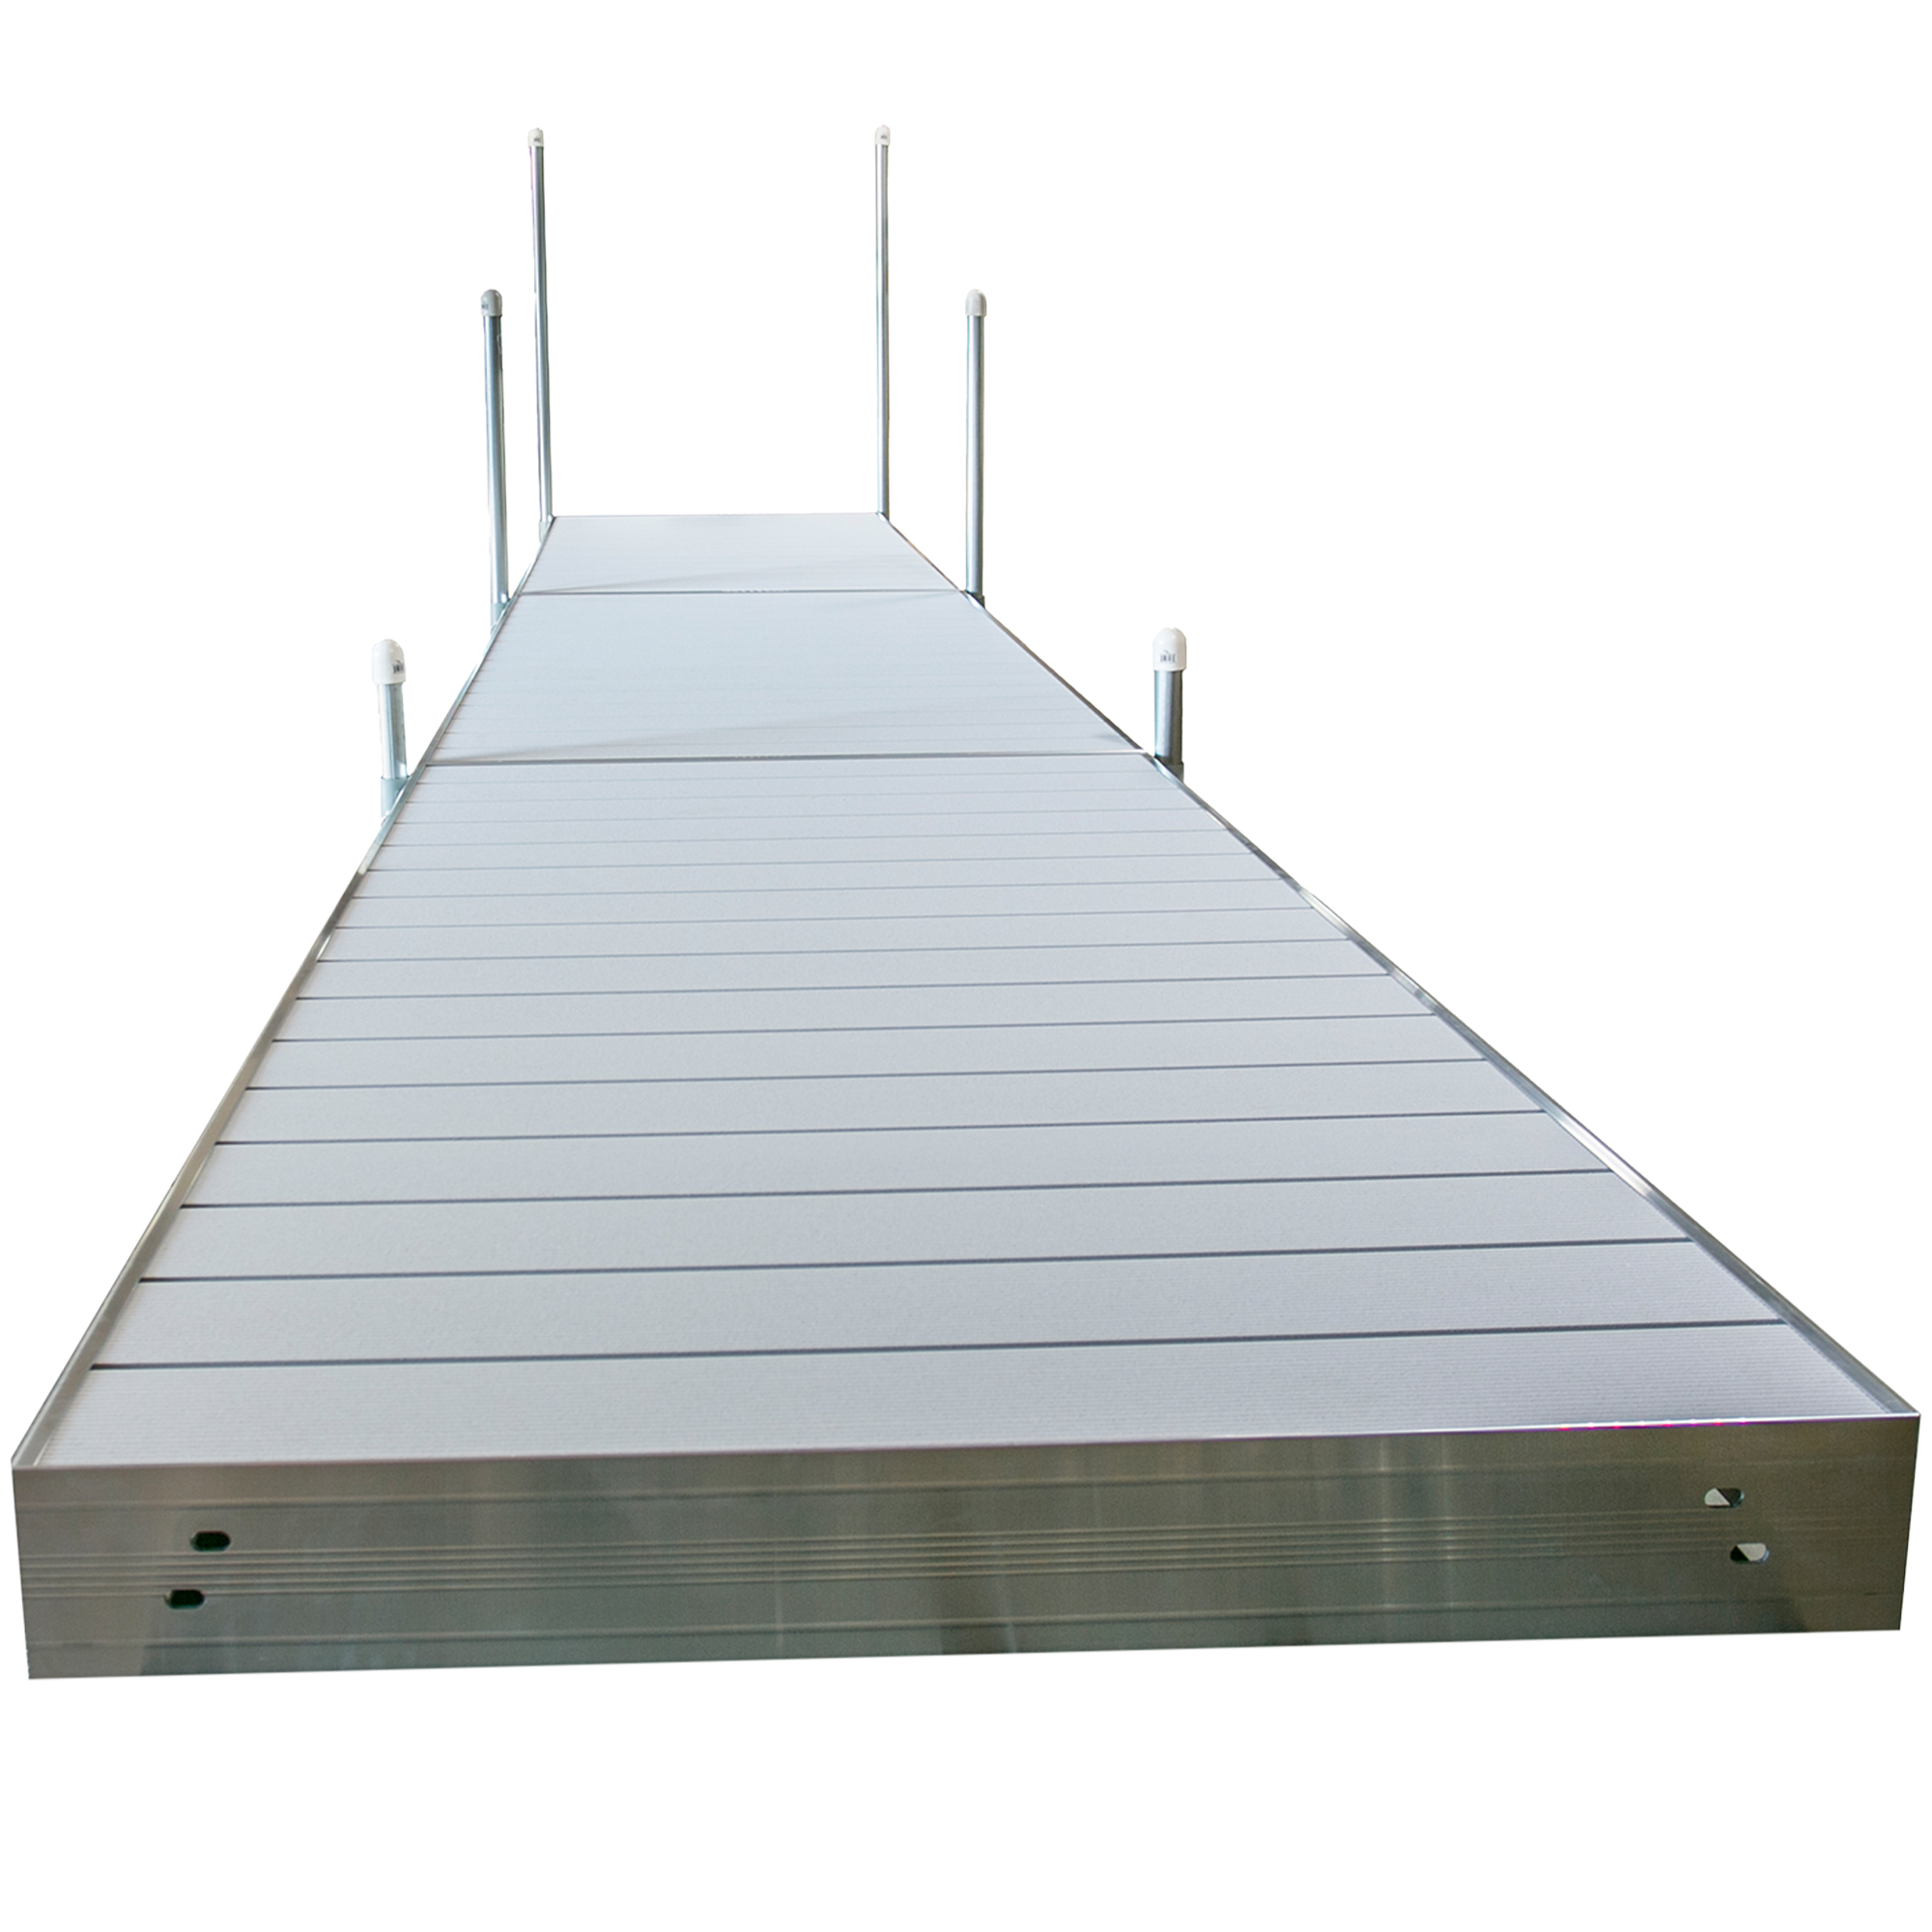 24’ Straight Boat Dock System with Aluminum Frame and Aluminum Decking